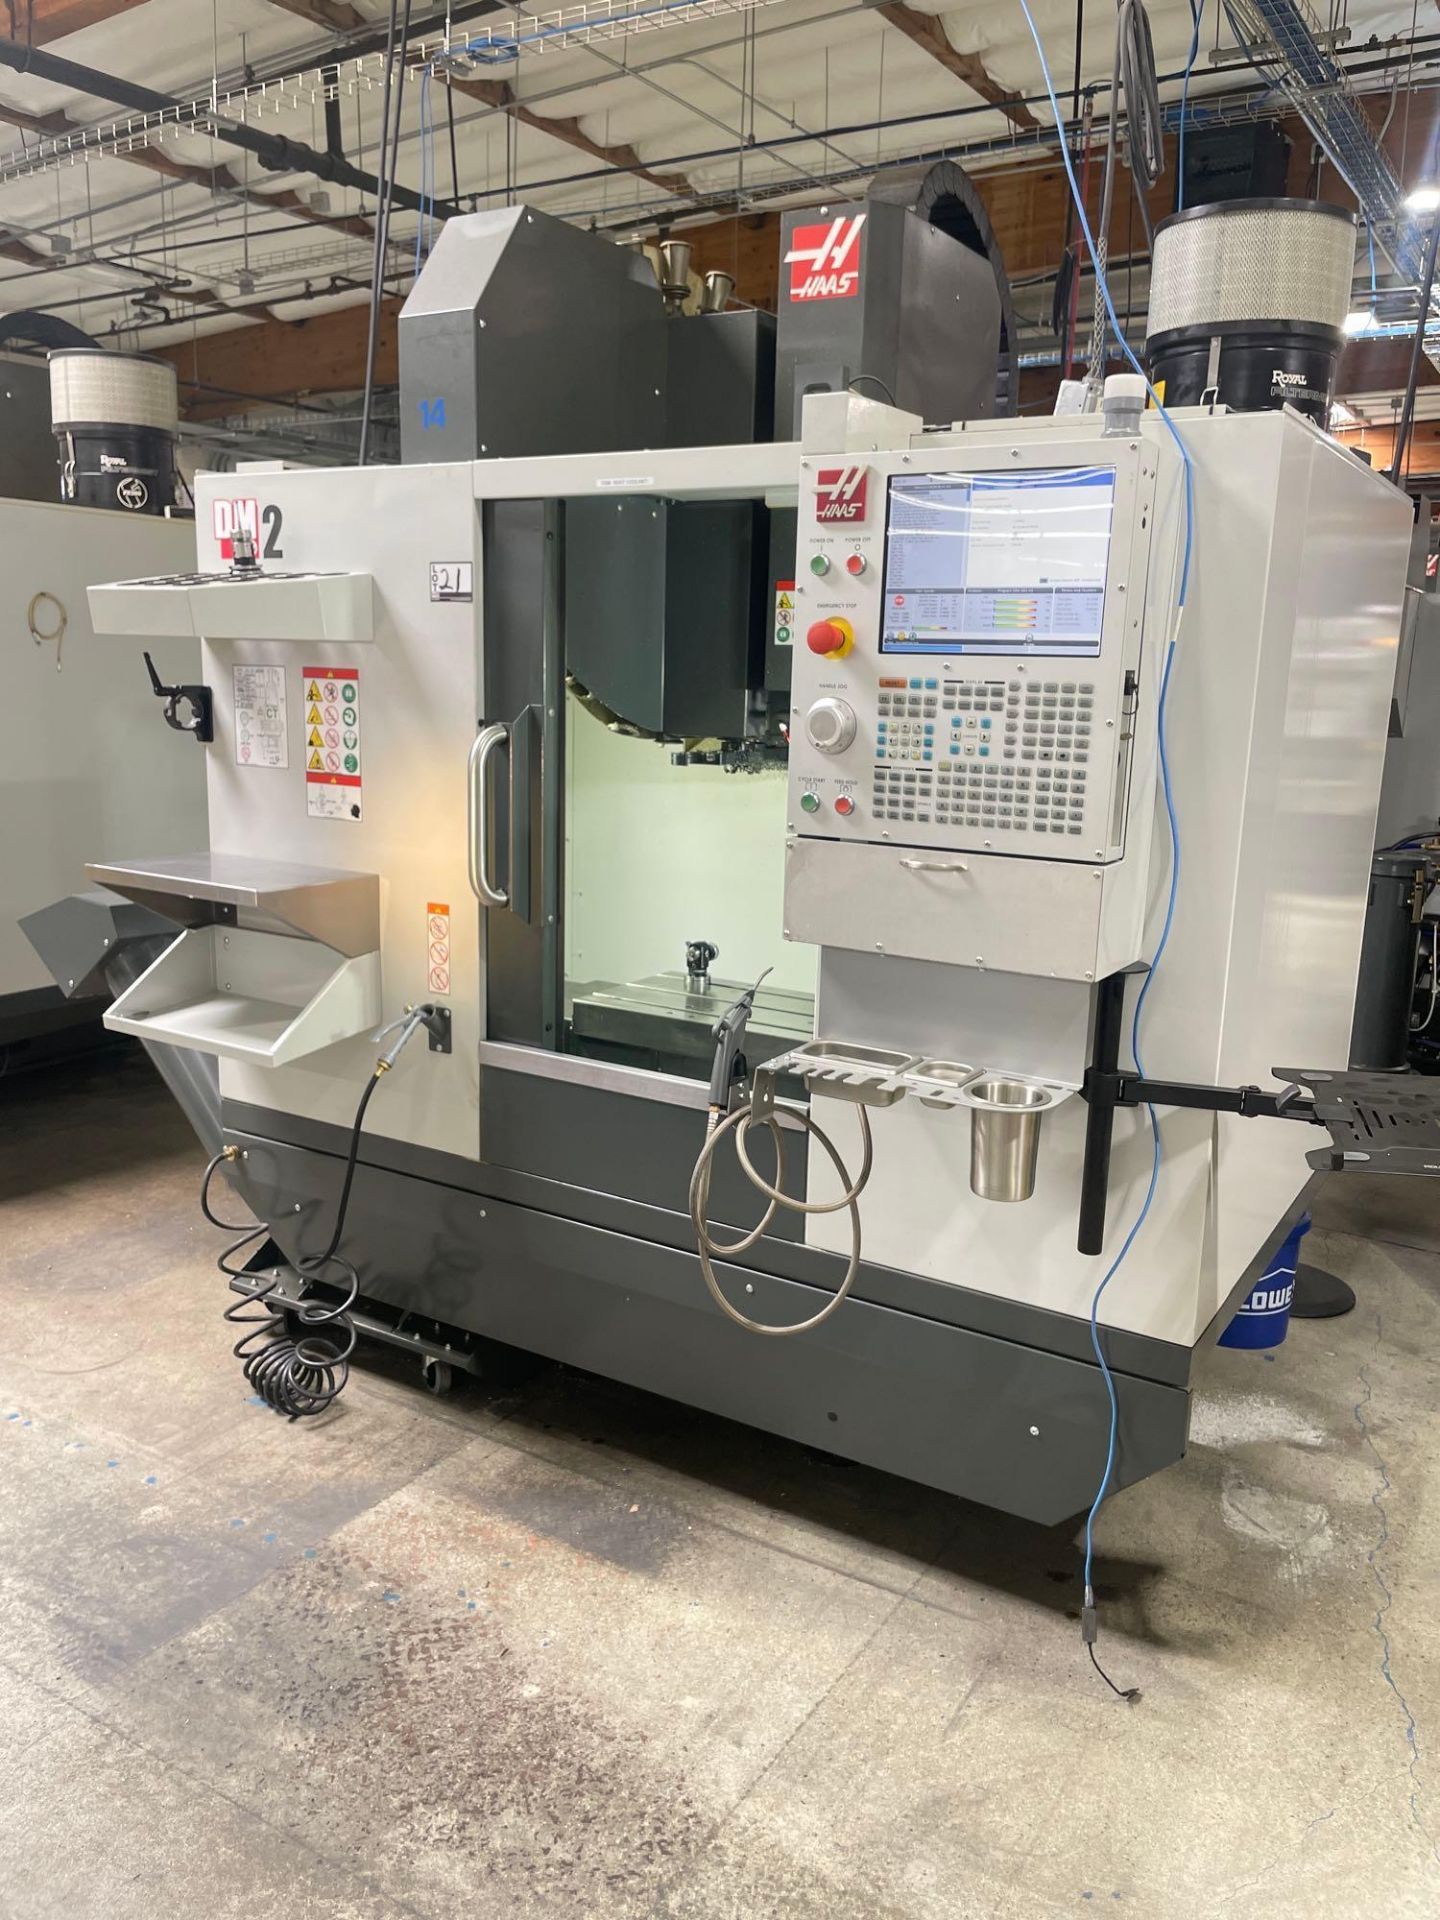 Haas DM-2, 28” x 16” x 15.5” Travels, CT 40, 18+1 SMTC, CTS, WIPS, as New as 2021 - Image 2 of 14